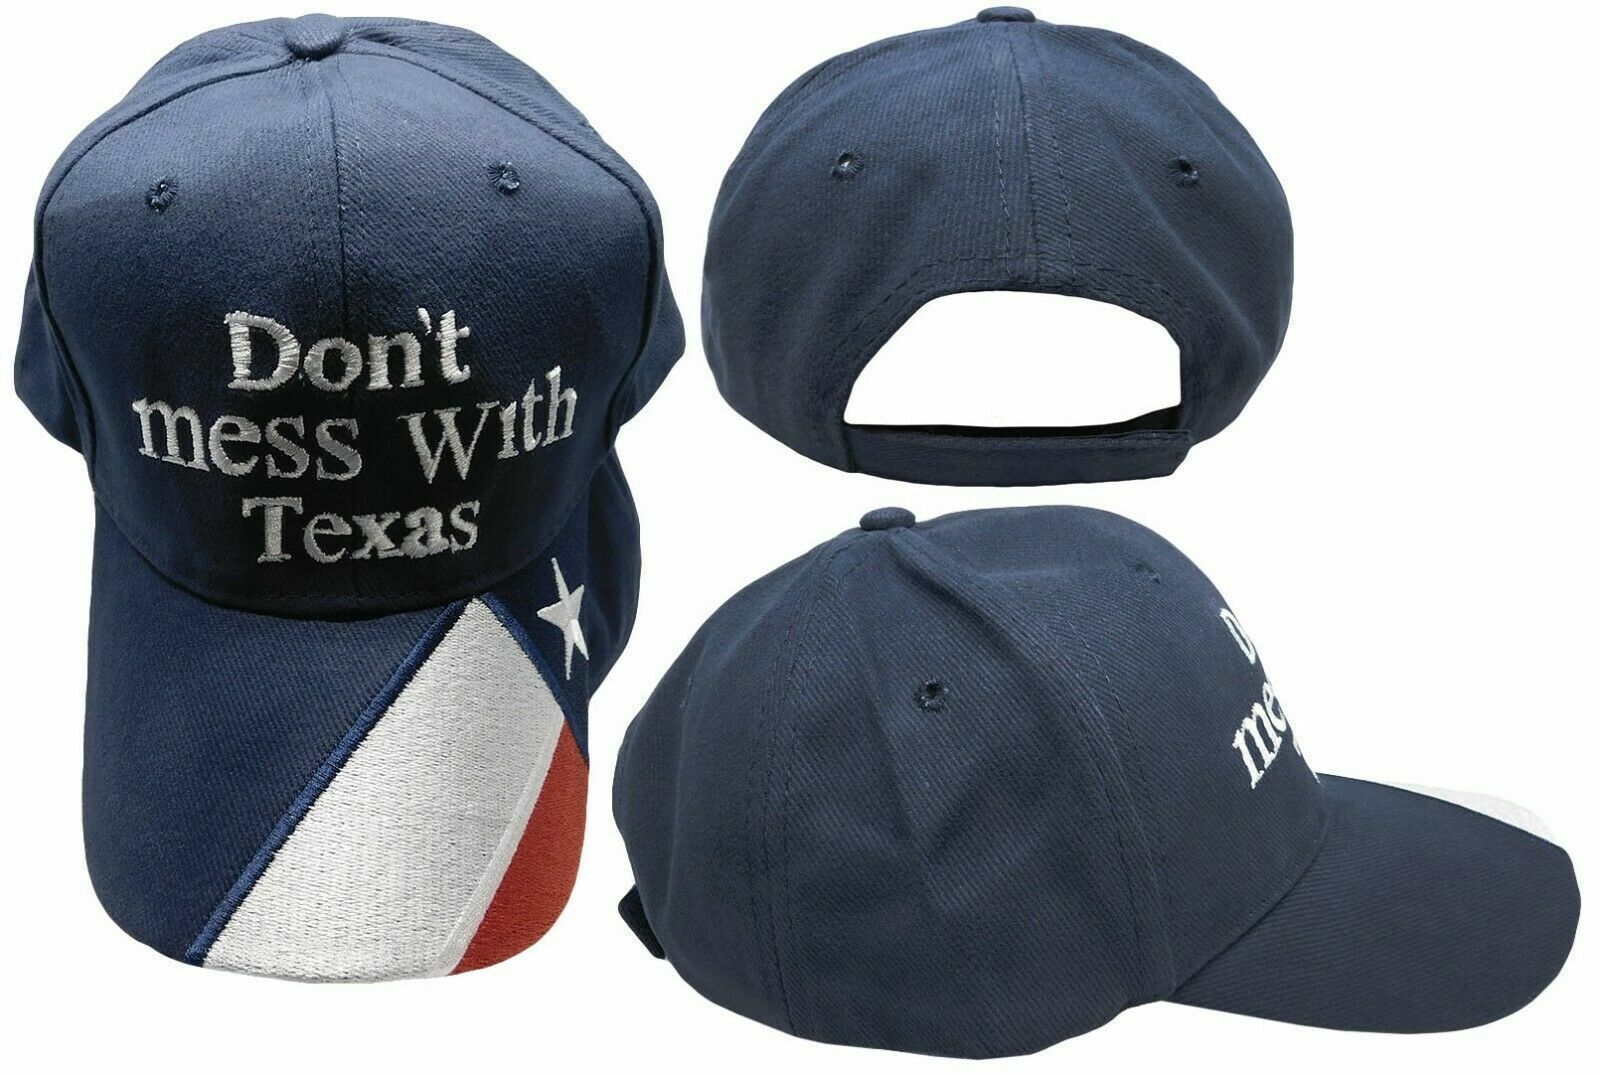 Primary image for Don'T Mess With Texas With Texas Flag On Bill Navy Blue Embroidered Cap Hat